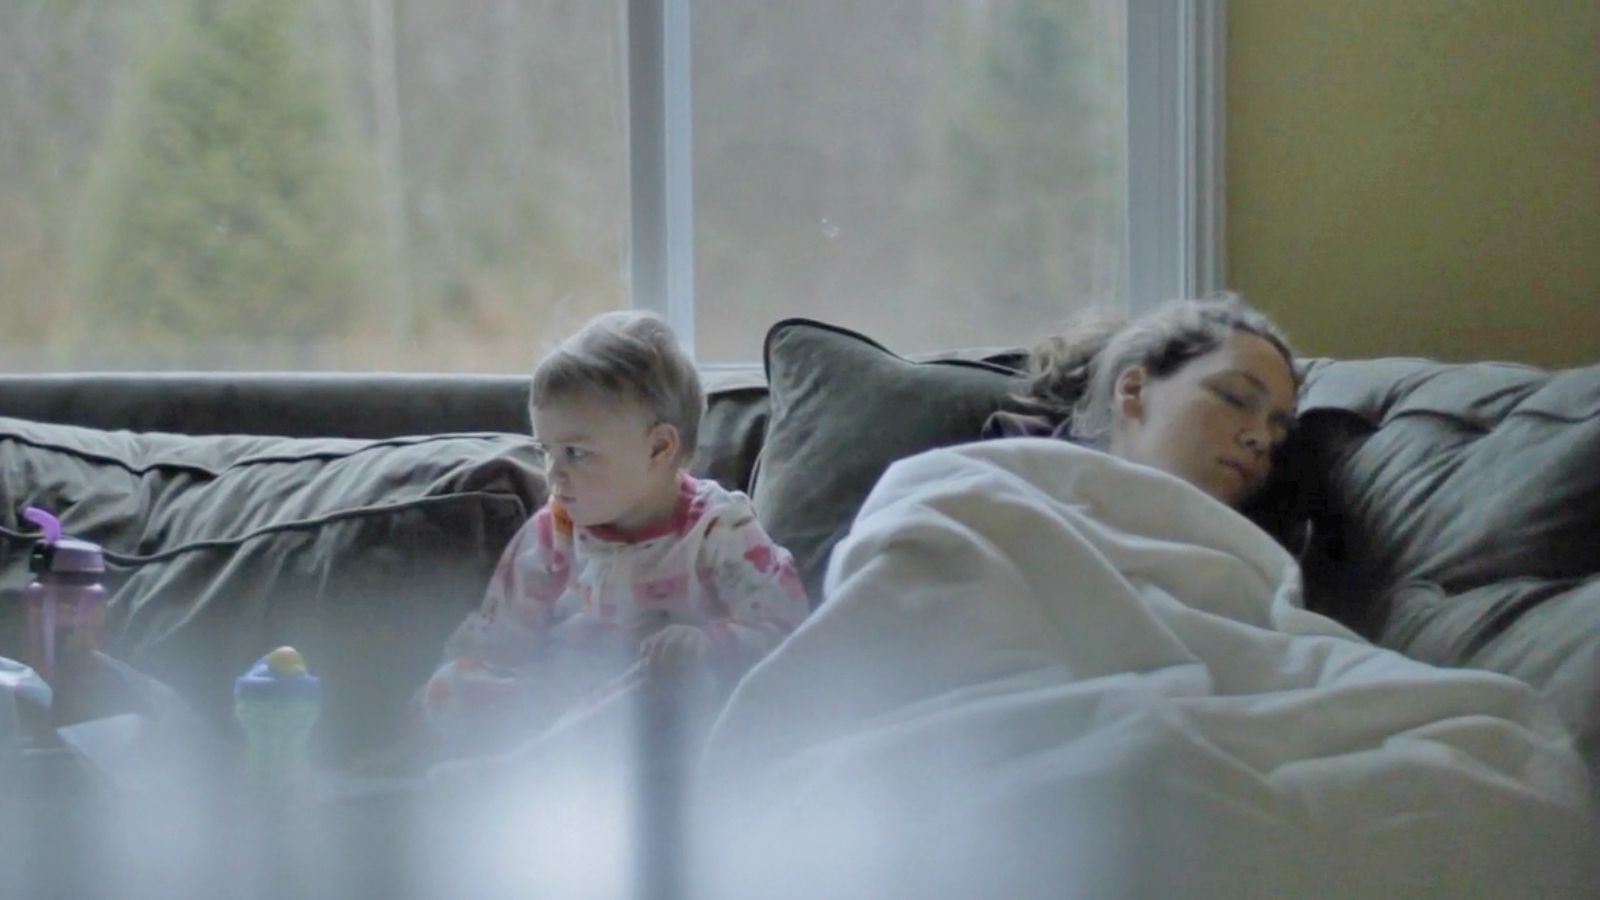 This Exhausted Mom Fell Asleep in Front of Her Child. The Baby’s Reaction Is Beautiful.